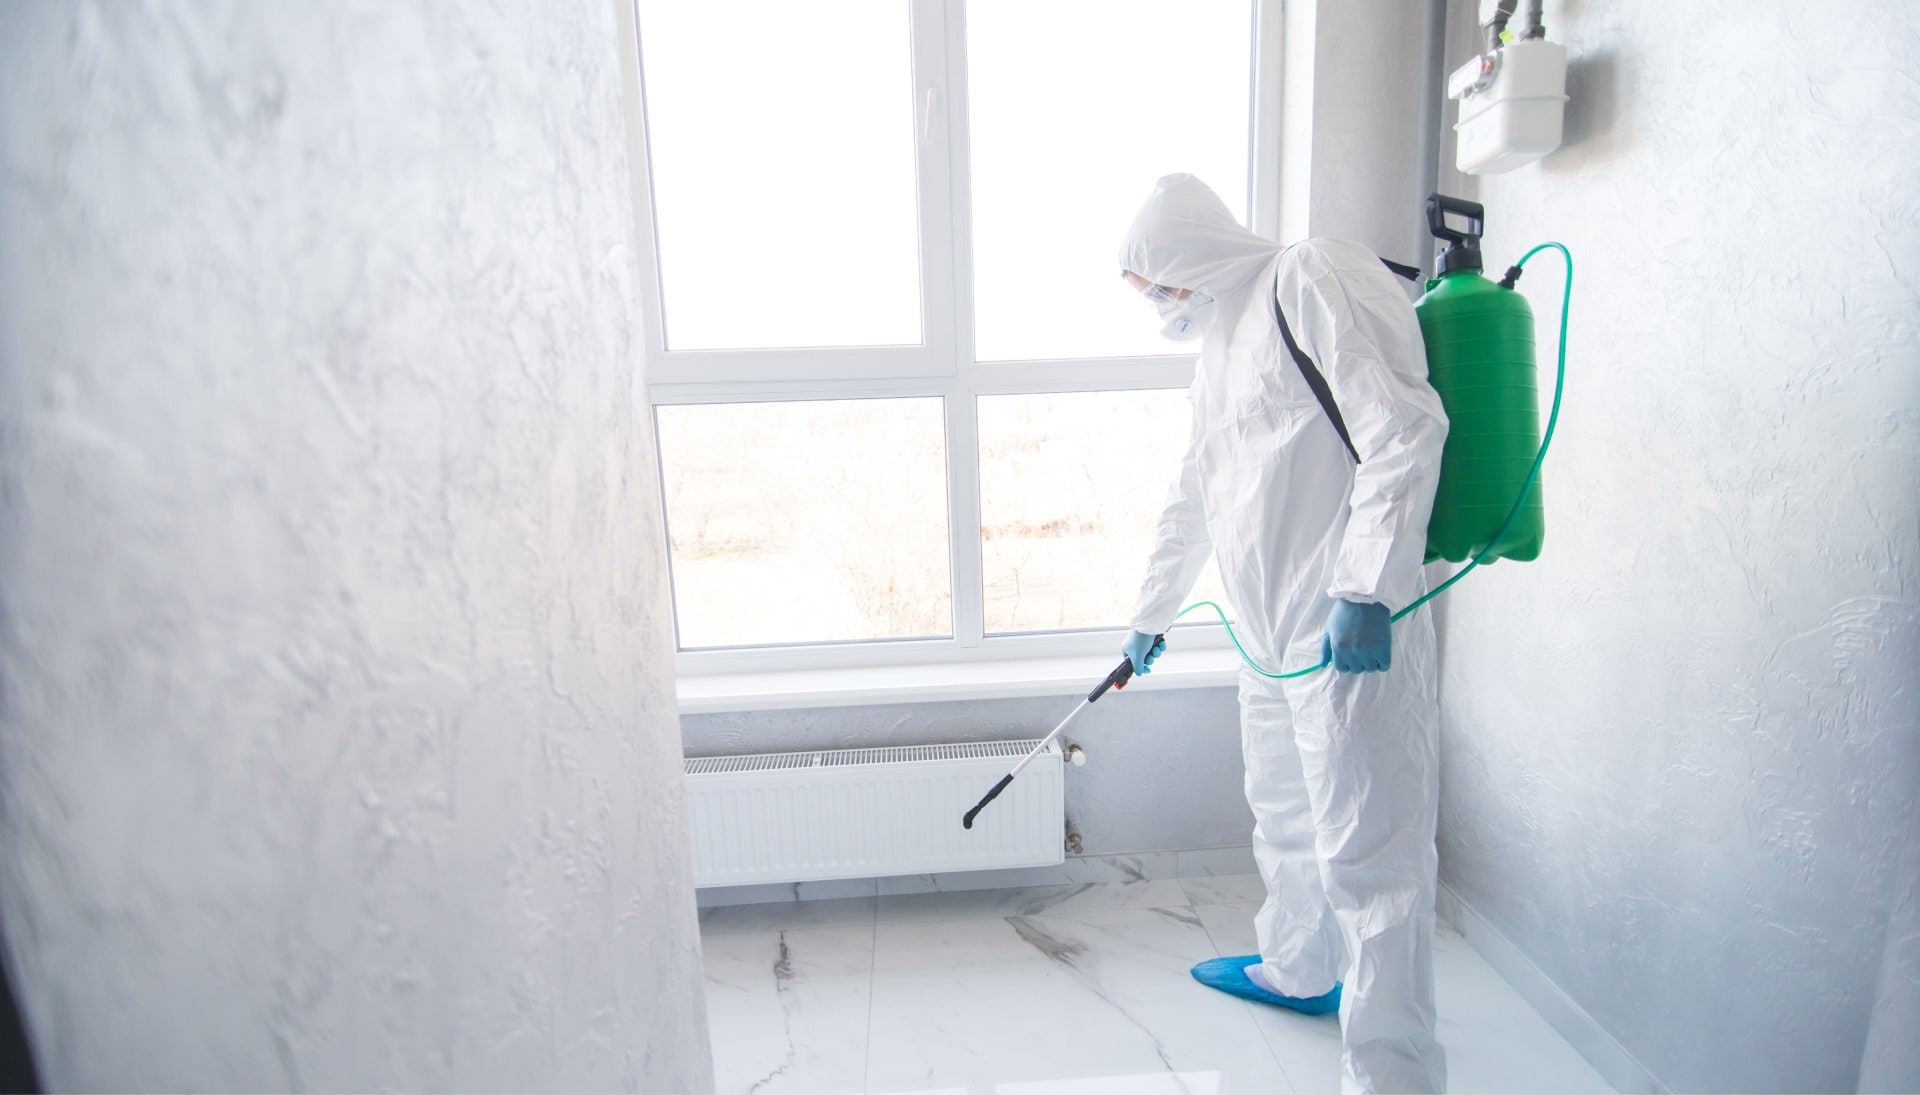 We provide the highest-quality mold inspection, testing, and removal services in the Lexington, SC area.